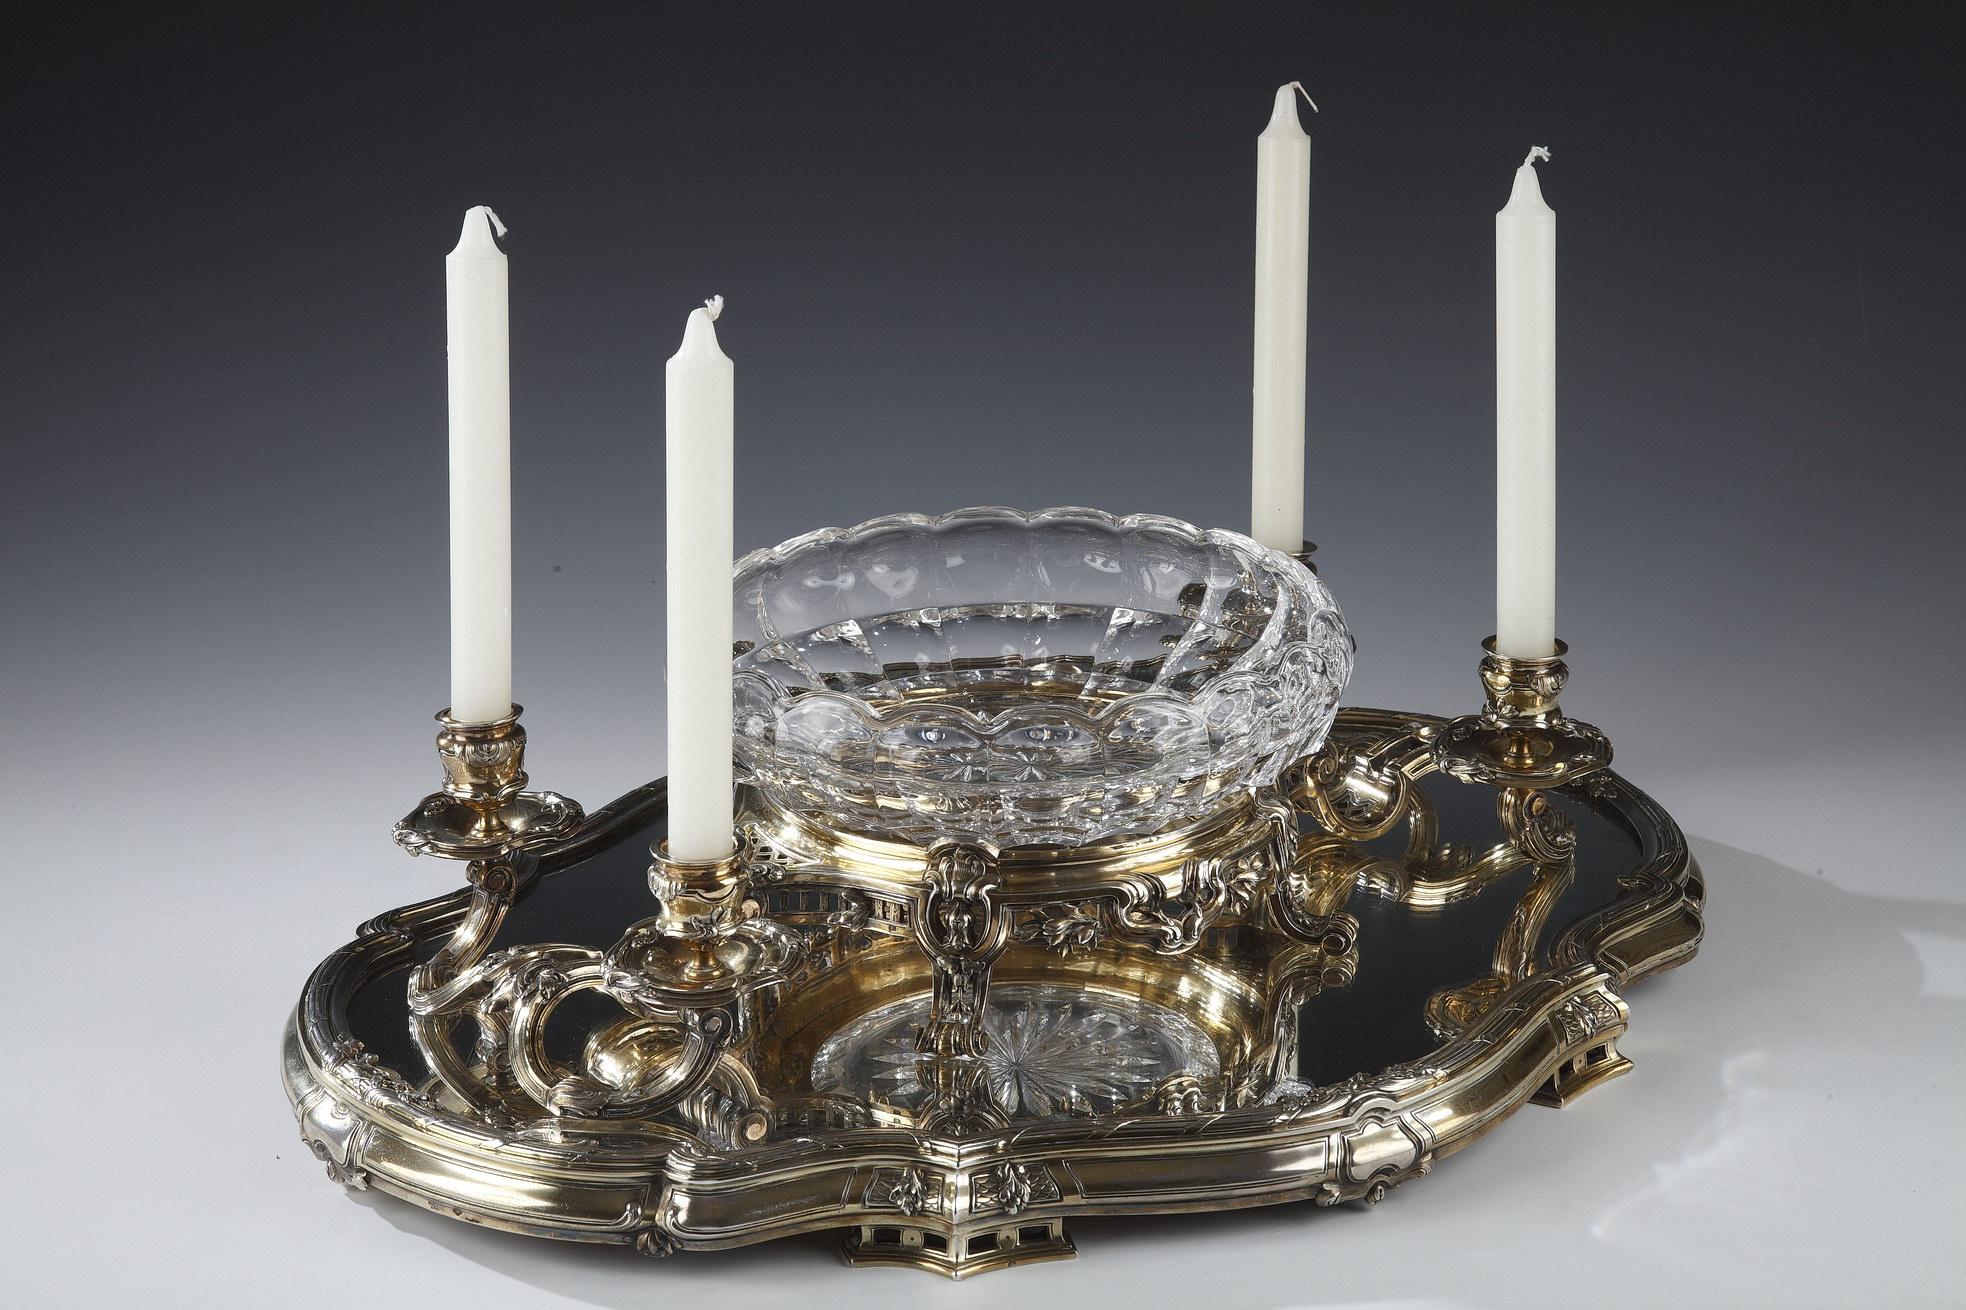 French Charming Silver-Gilt Centerpiece by Boin-Taburet, France, Circa 1880 For Sale